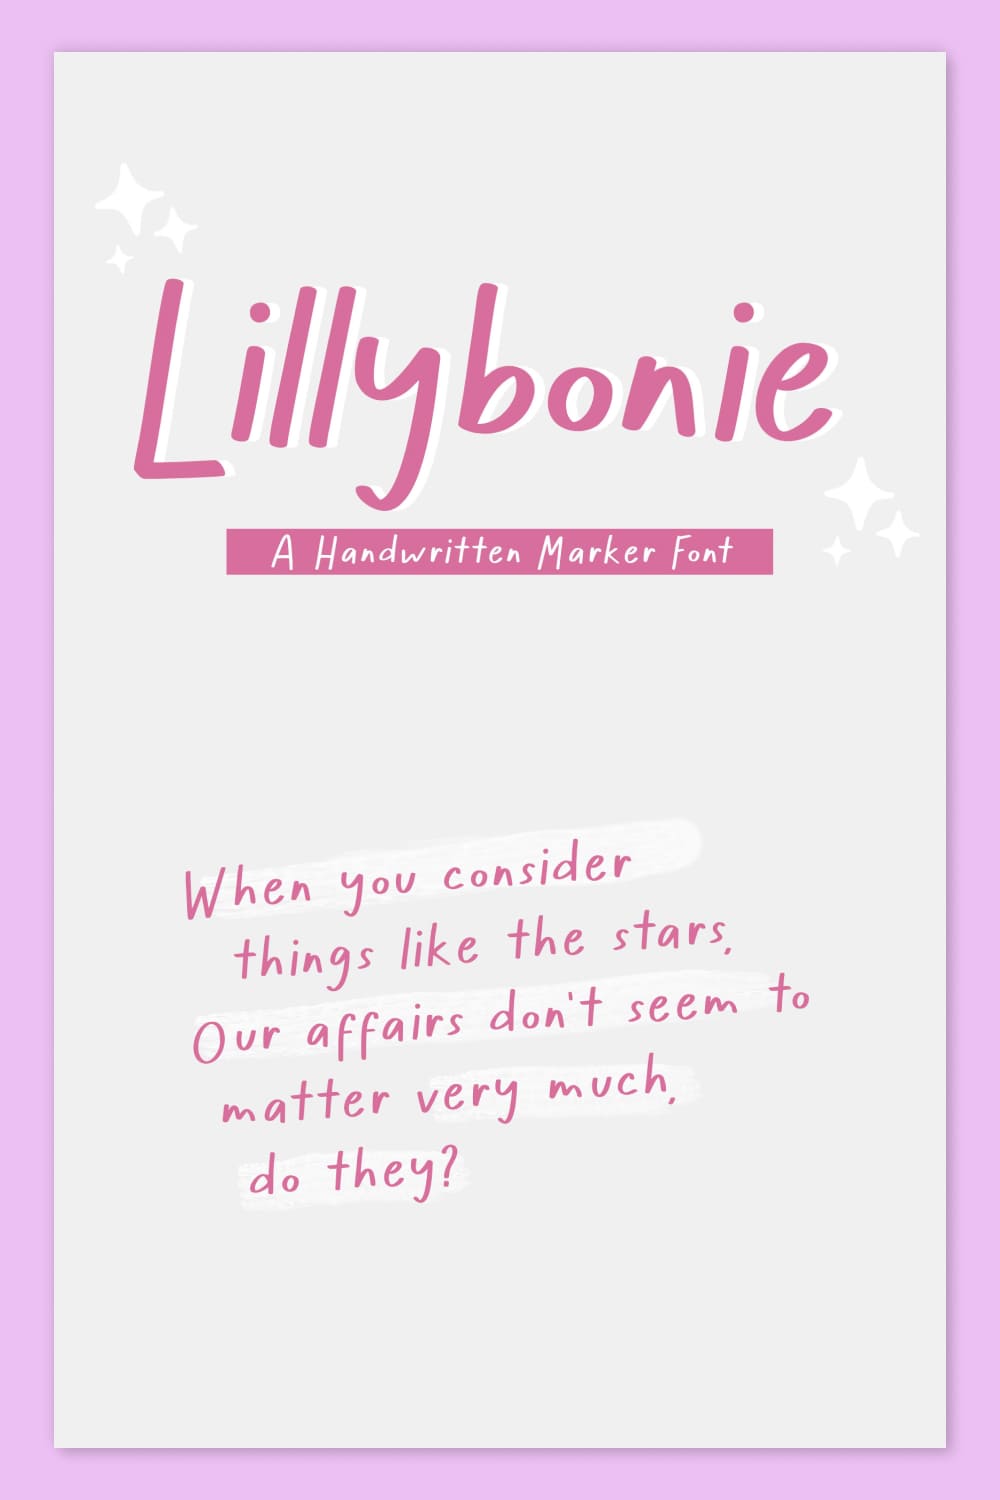 An example of a Lillybonie font on a gray background.